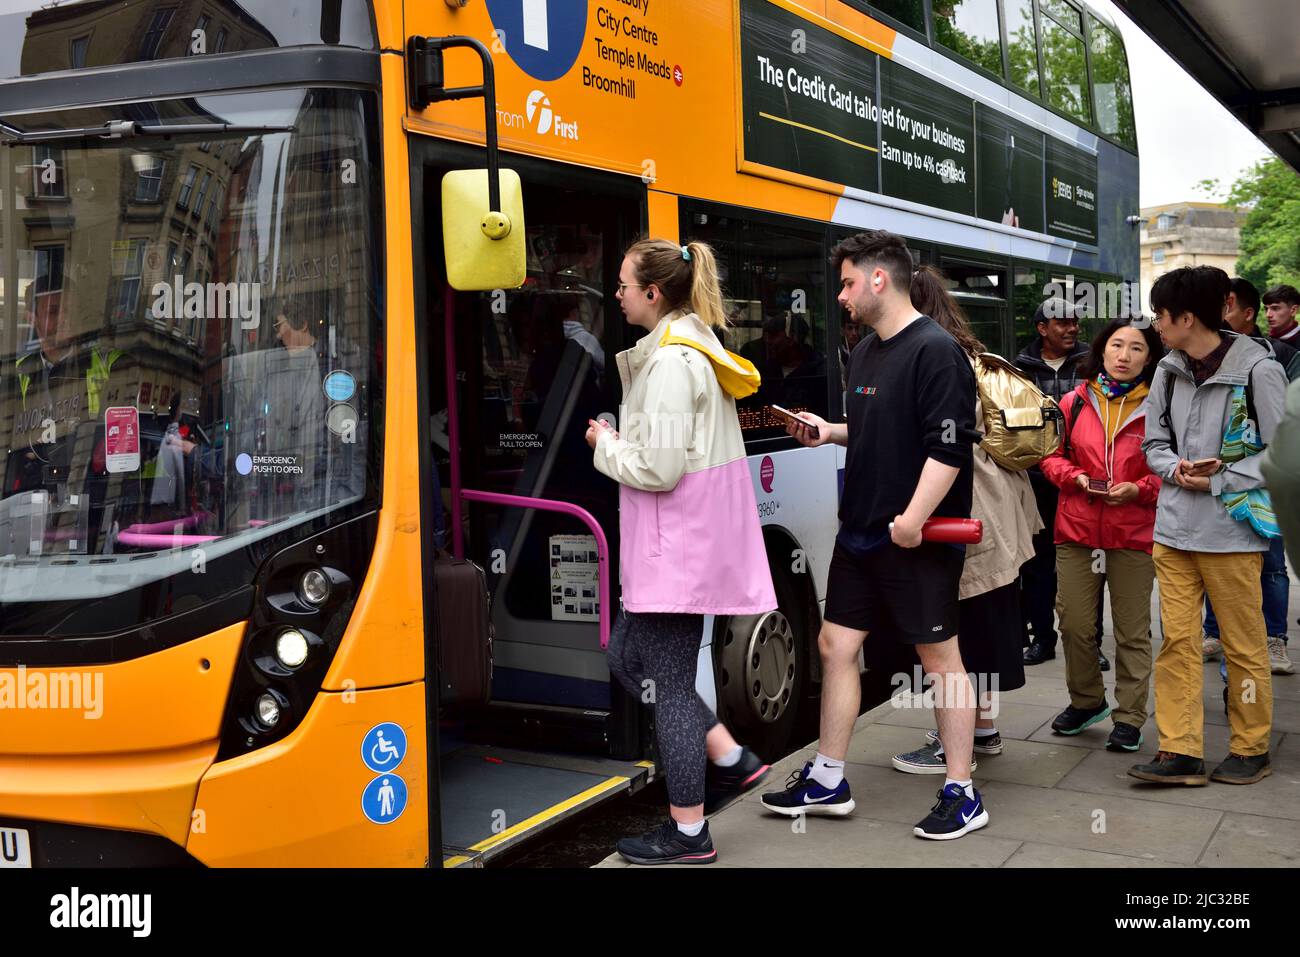 Passengers getting on double decker bus, Bristol bus stop using payment by mobile phone, UK Stock Photo